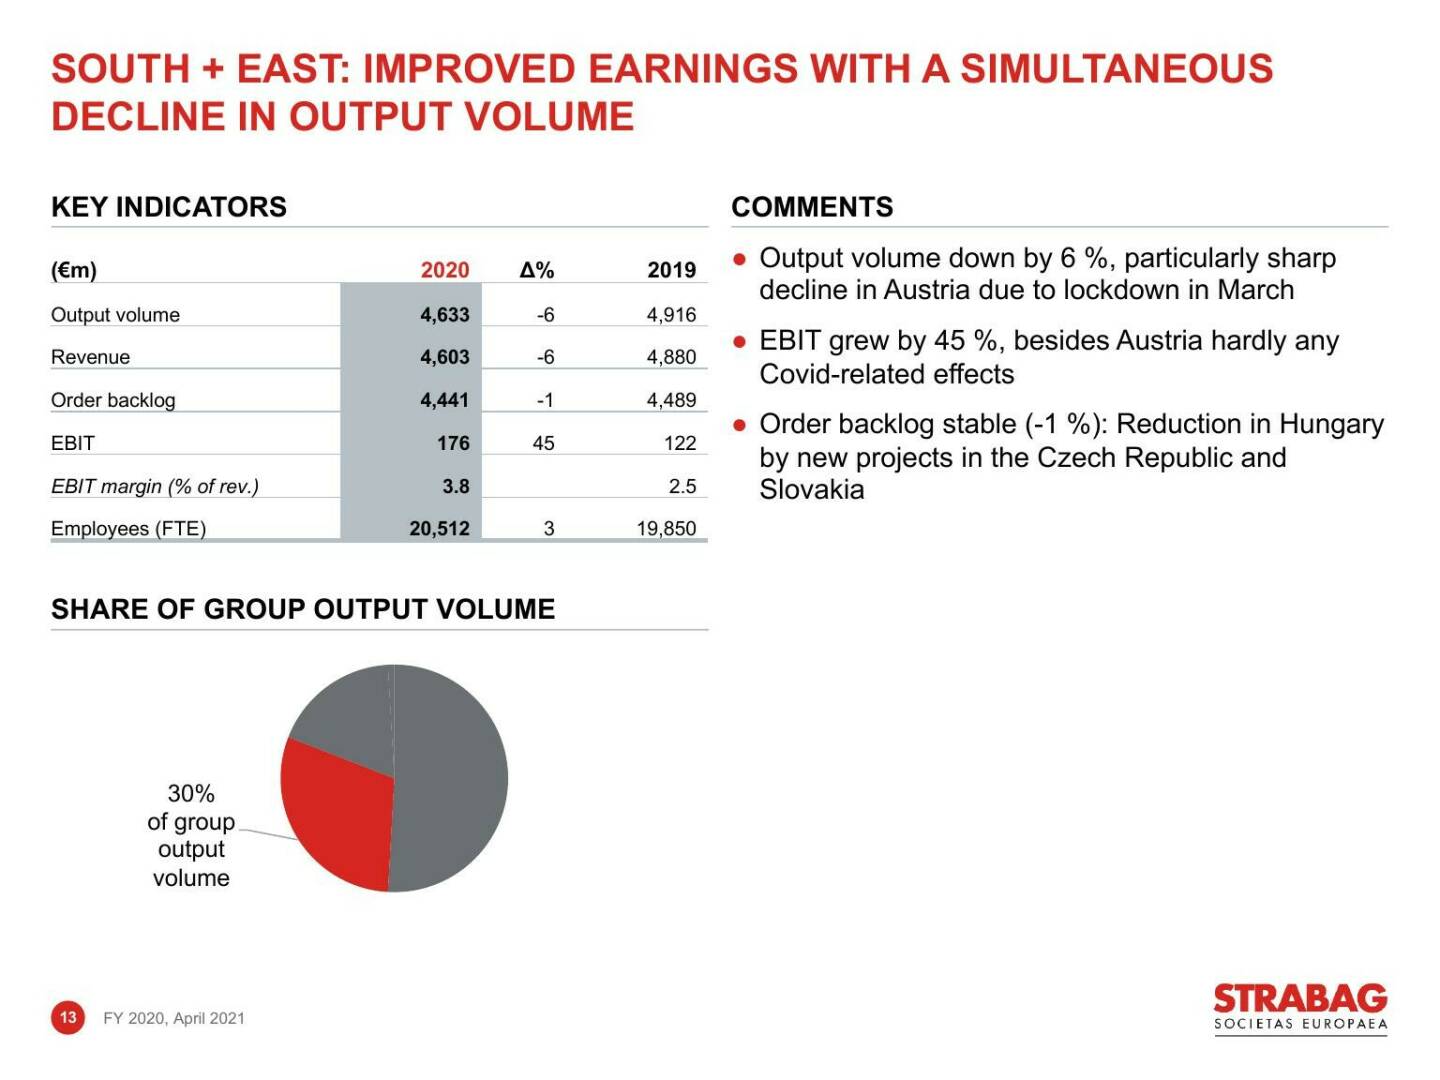 Strabag - South + East: improved earnings with a simultaneous decline in output volume